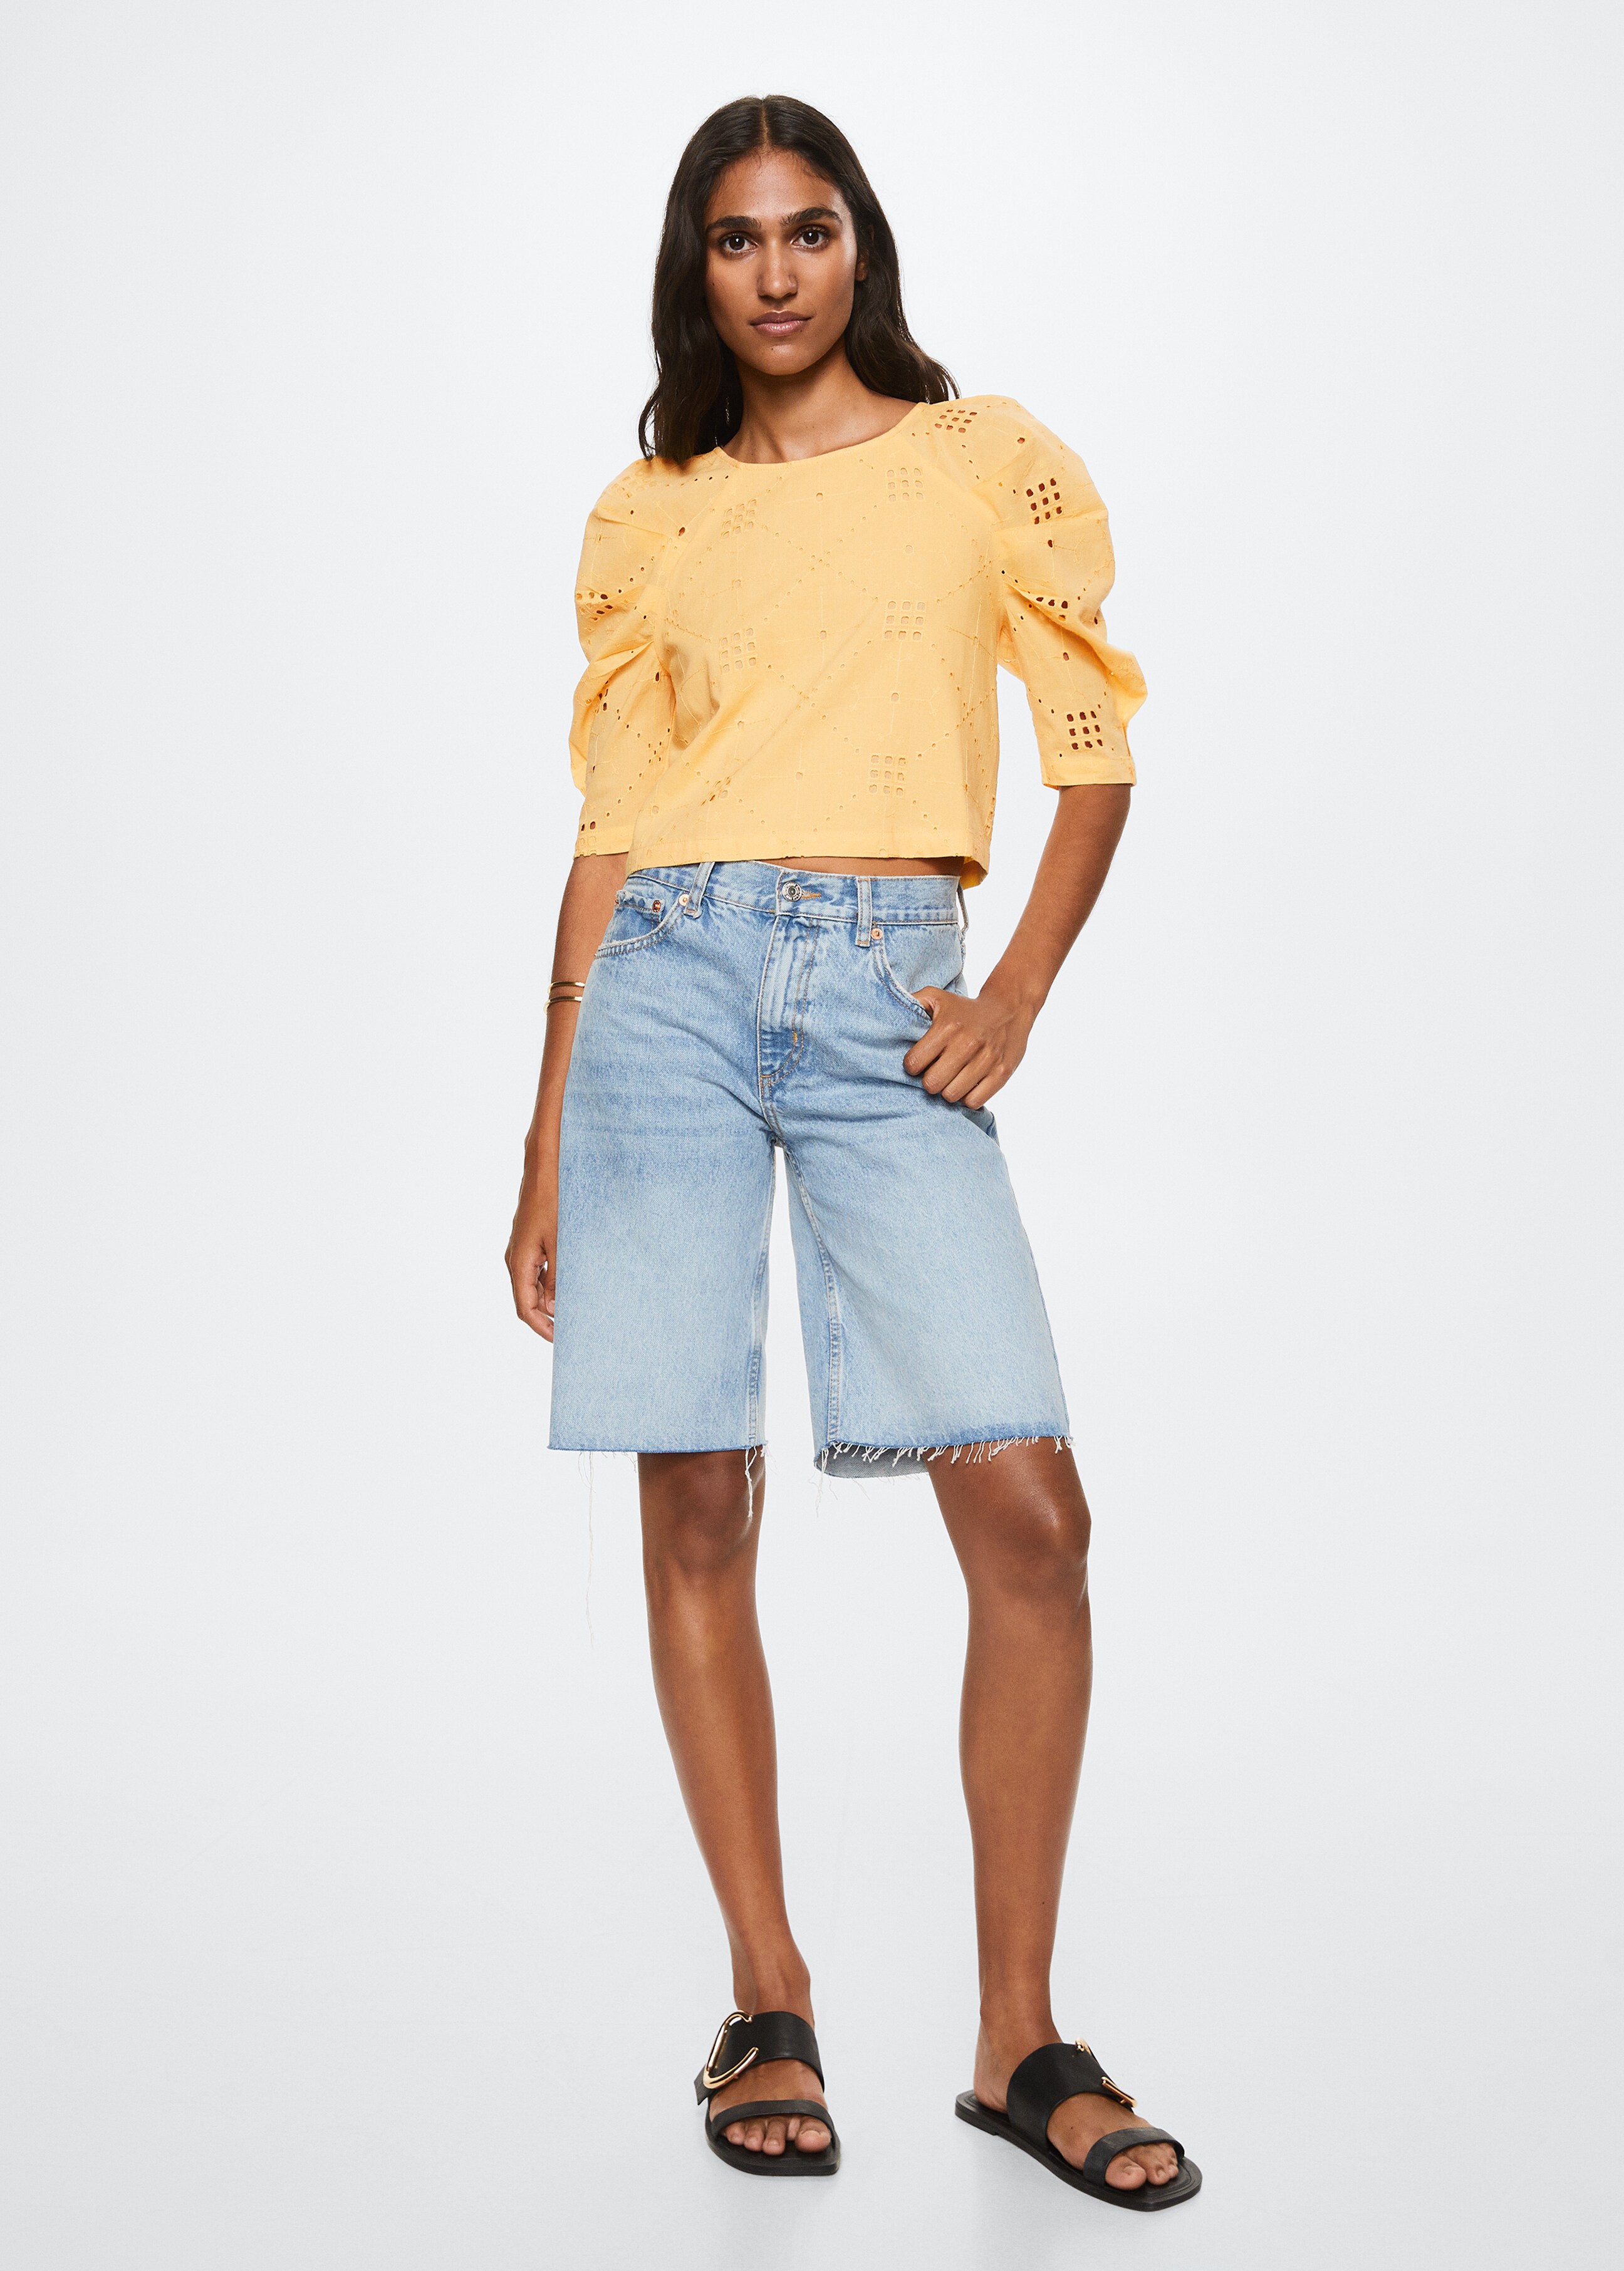 Puff-sleeved cropped blouse - General plane